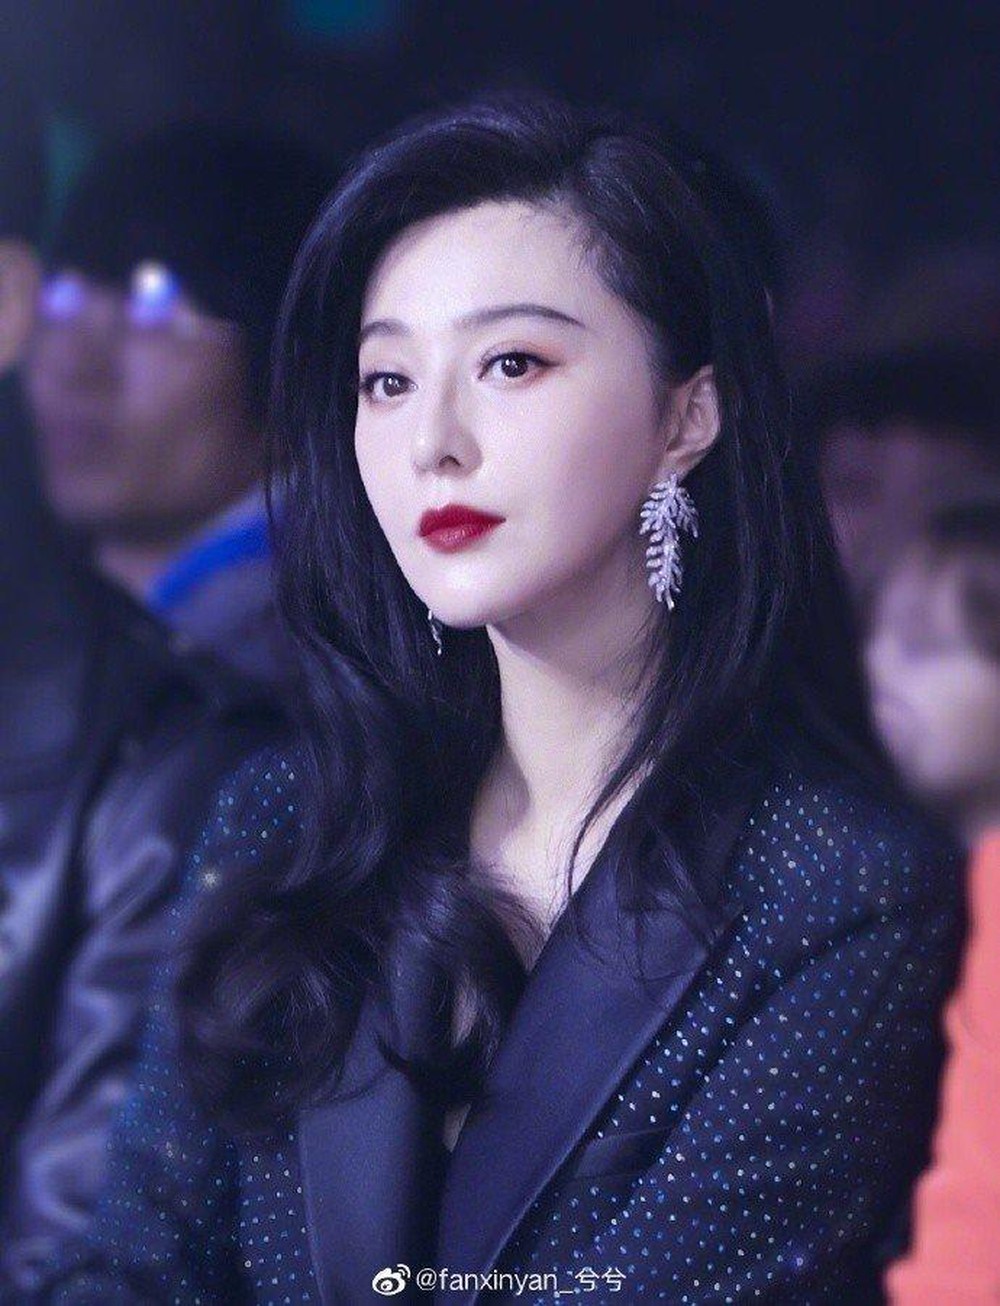 fan-bingbing-returns-after-two-years-dealing-with-tax-evasion-scandal-2